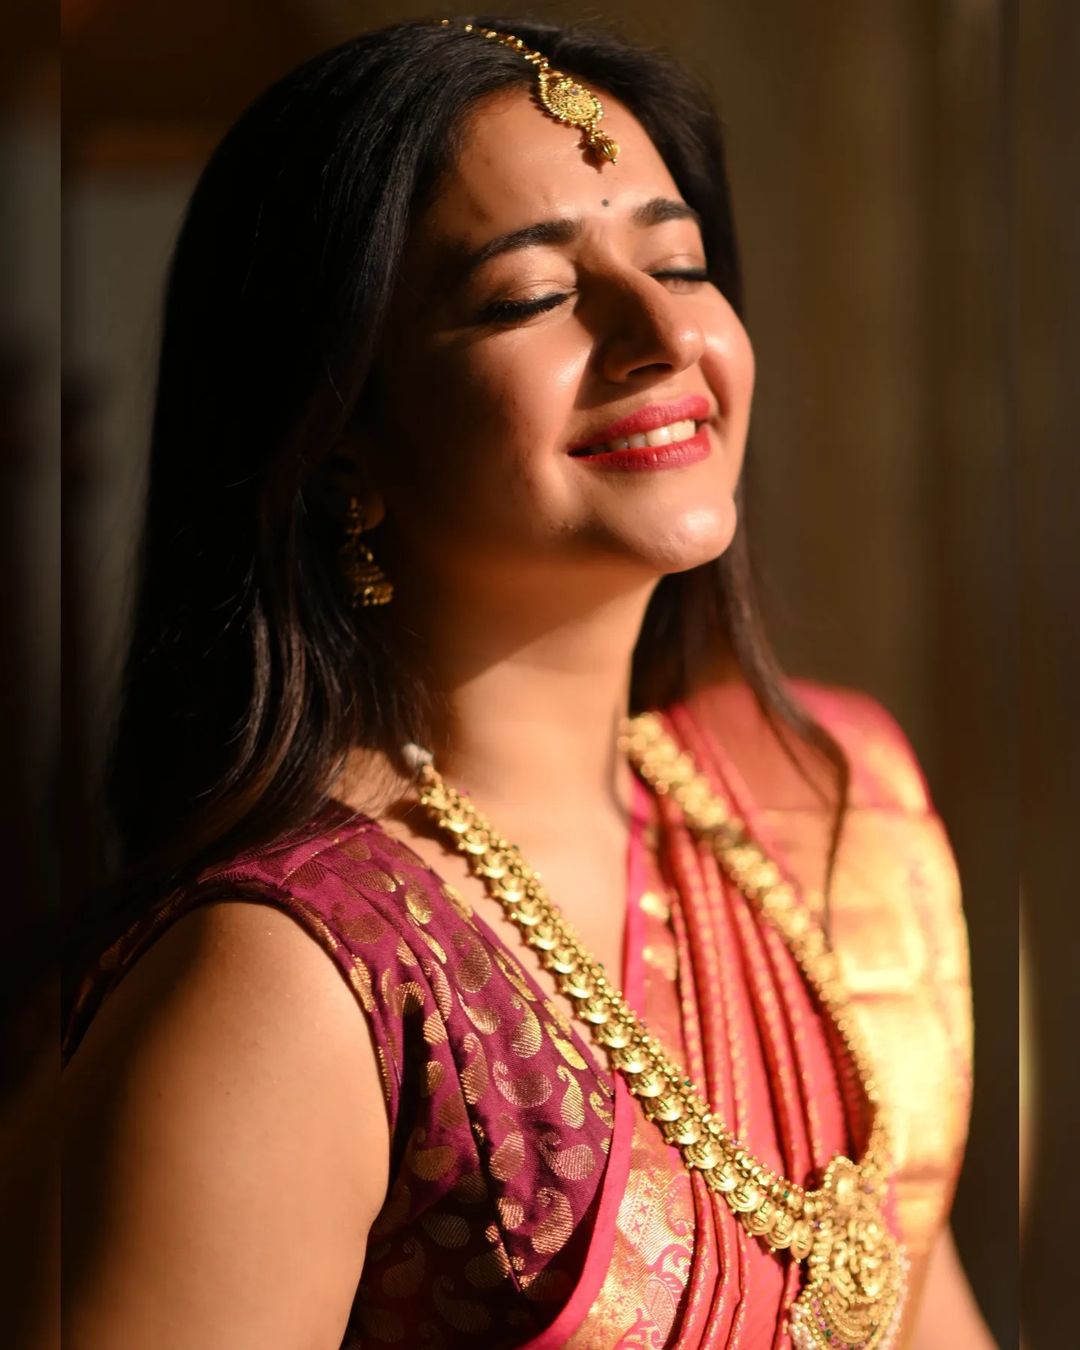 Poonam bajwa hot traditional outlook in saree and jewels